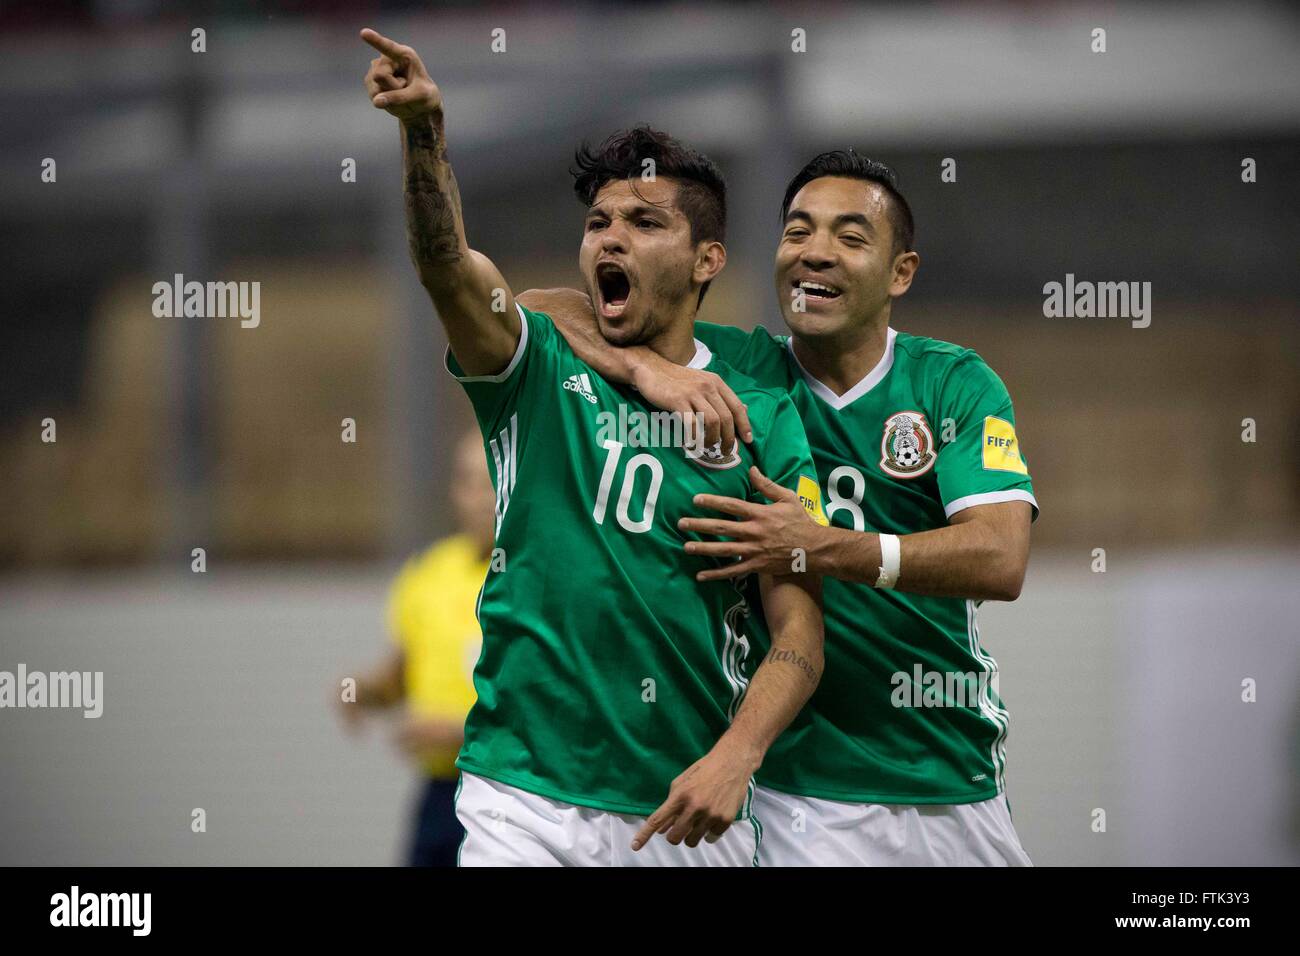 Ciudad De Mexico, Mexico. 29th Mar, 2016. Mexico's Jesus Corona (L) celebrates after scoring with his teammate Marco Fabian during the qualifying match for 2018 Russia World Cup against Canada at Azteca Stadium in Mexico City, capital of Mexico, on March 29, 2016. Mexico won 2-0. © Alejandro Ayala/Xinhua/Alamy Live News Stock Photo